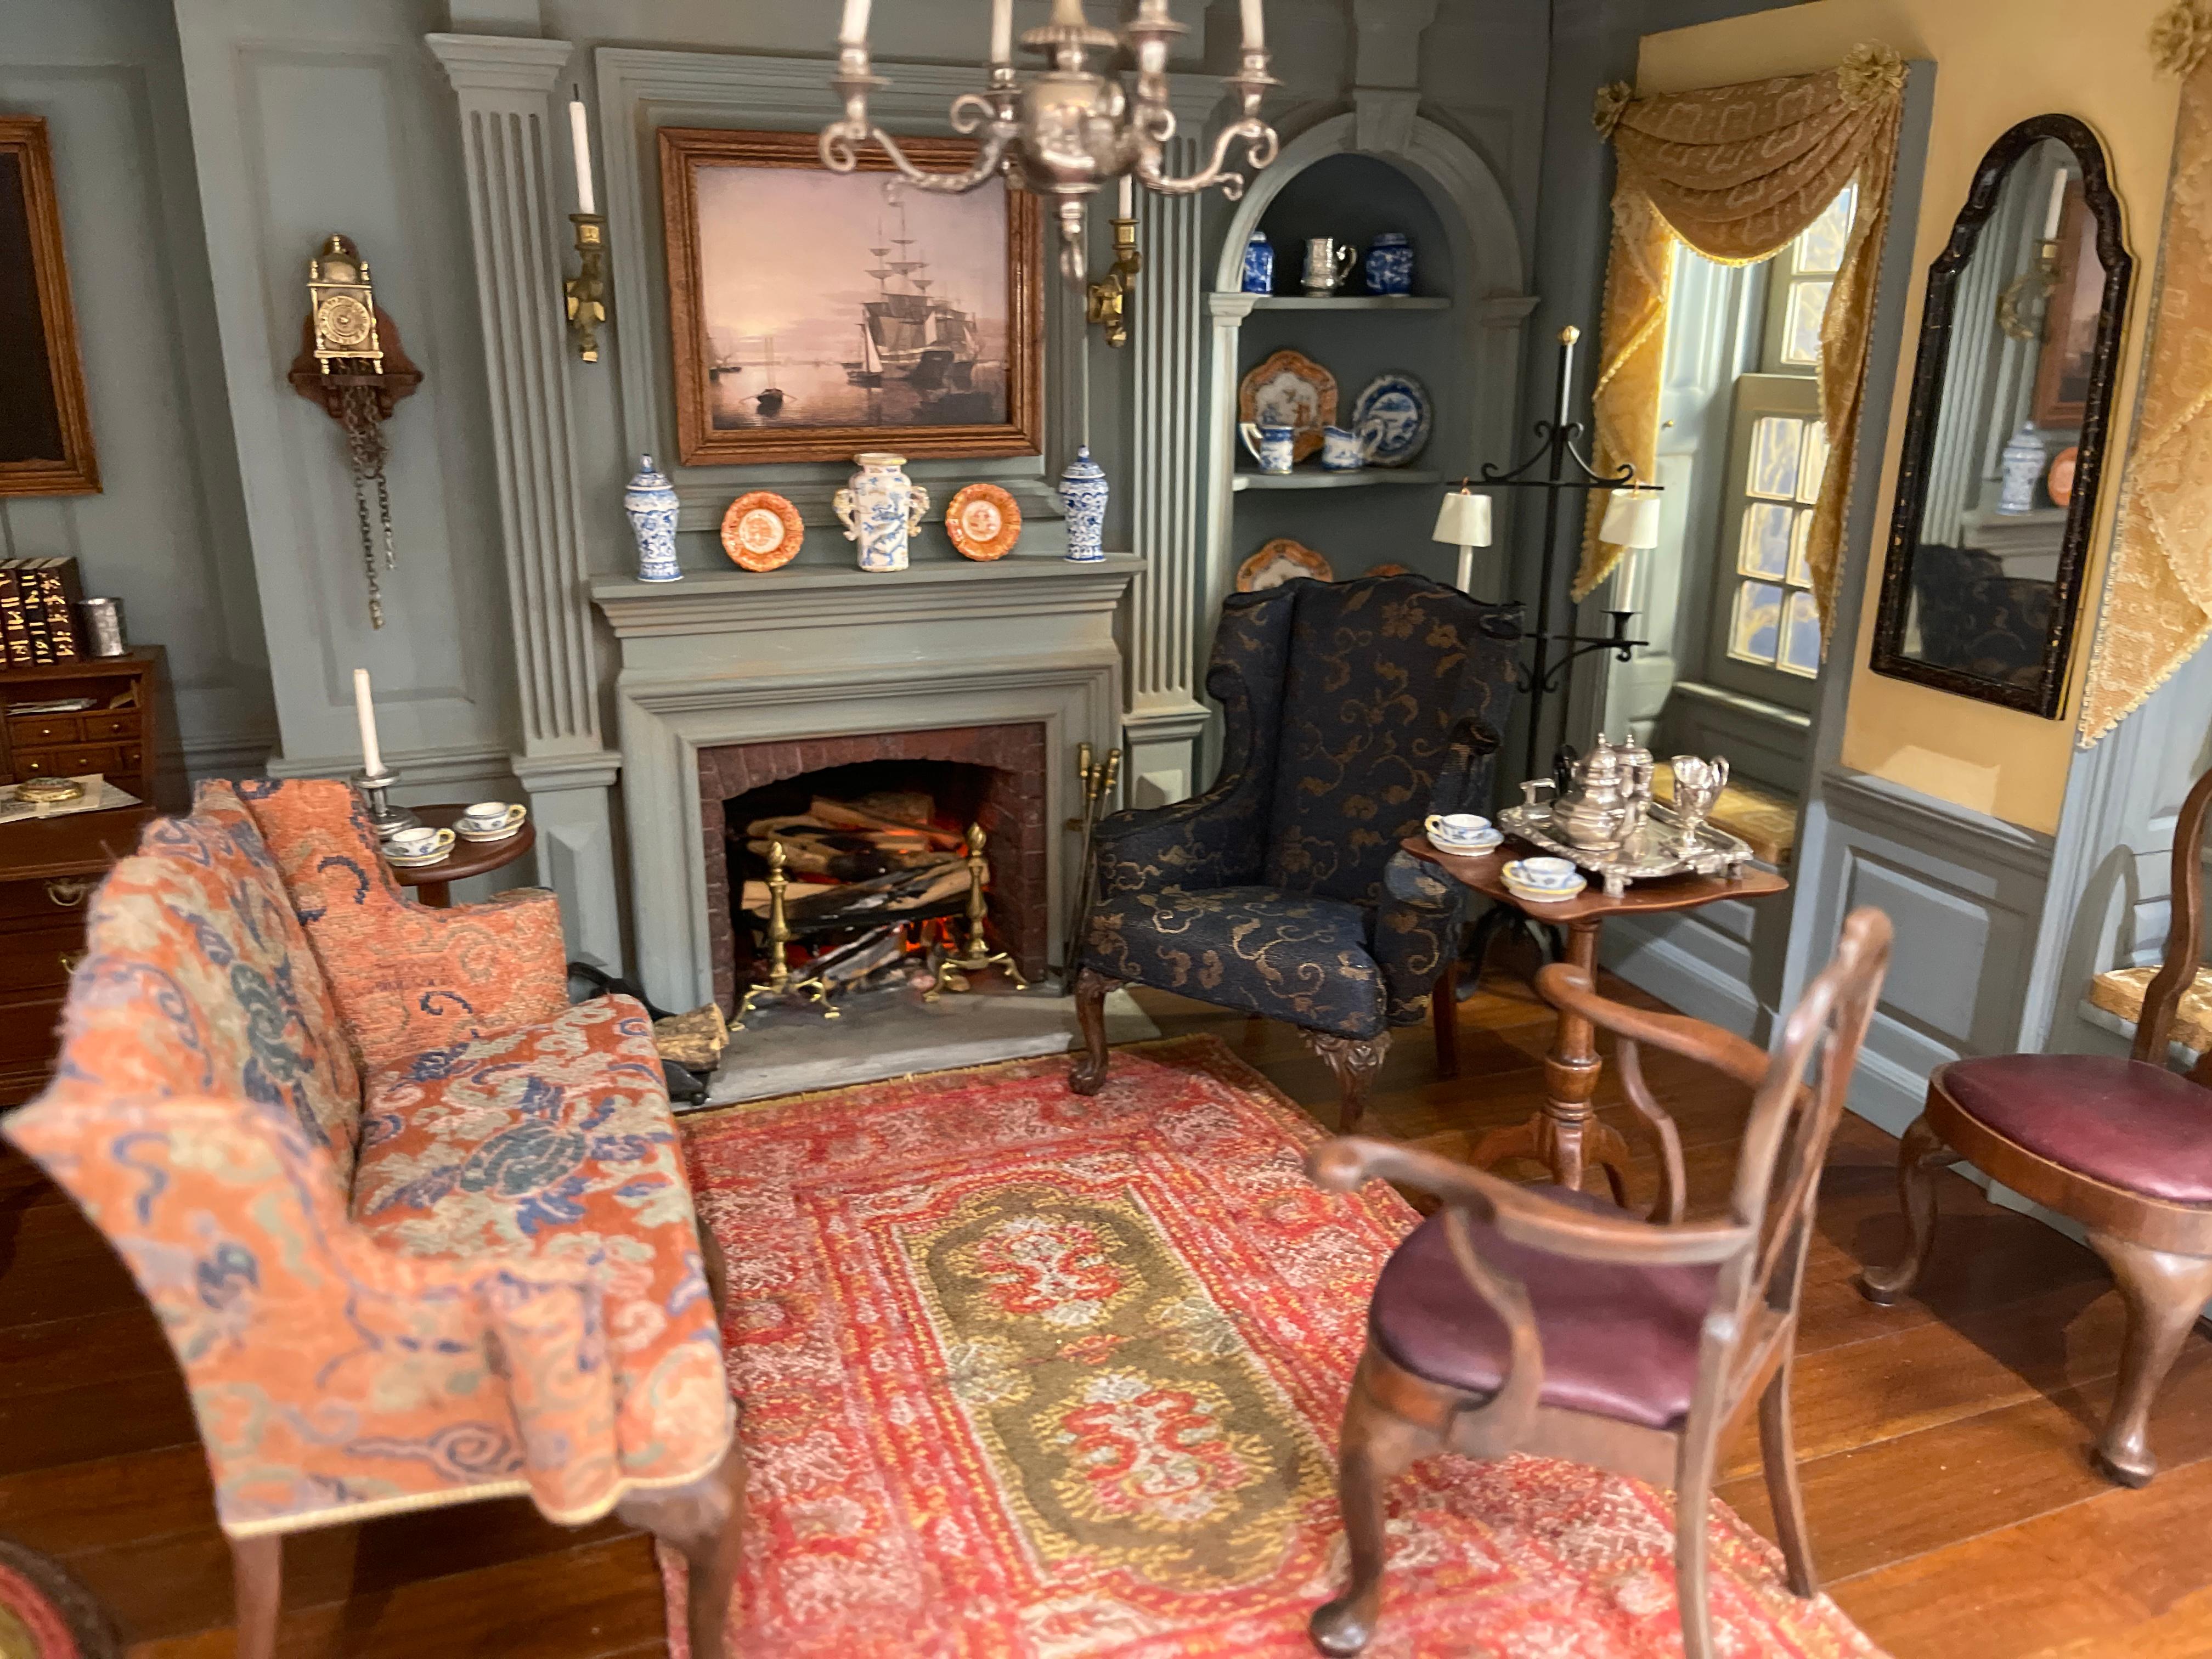 Late Colonial Sitting Room, Boston MA, 1760 - Miniature Room by Kupjack Studios For Sale 3